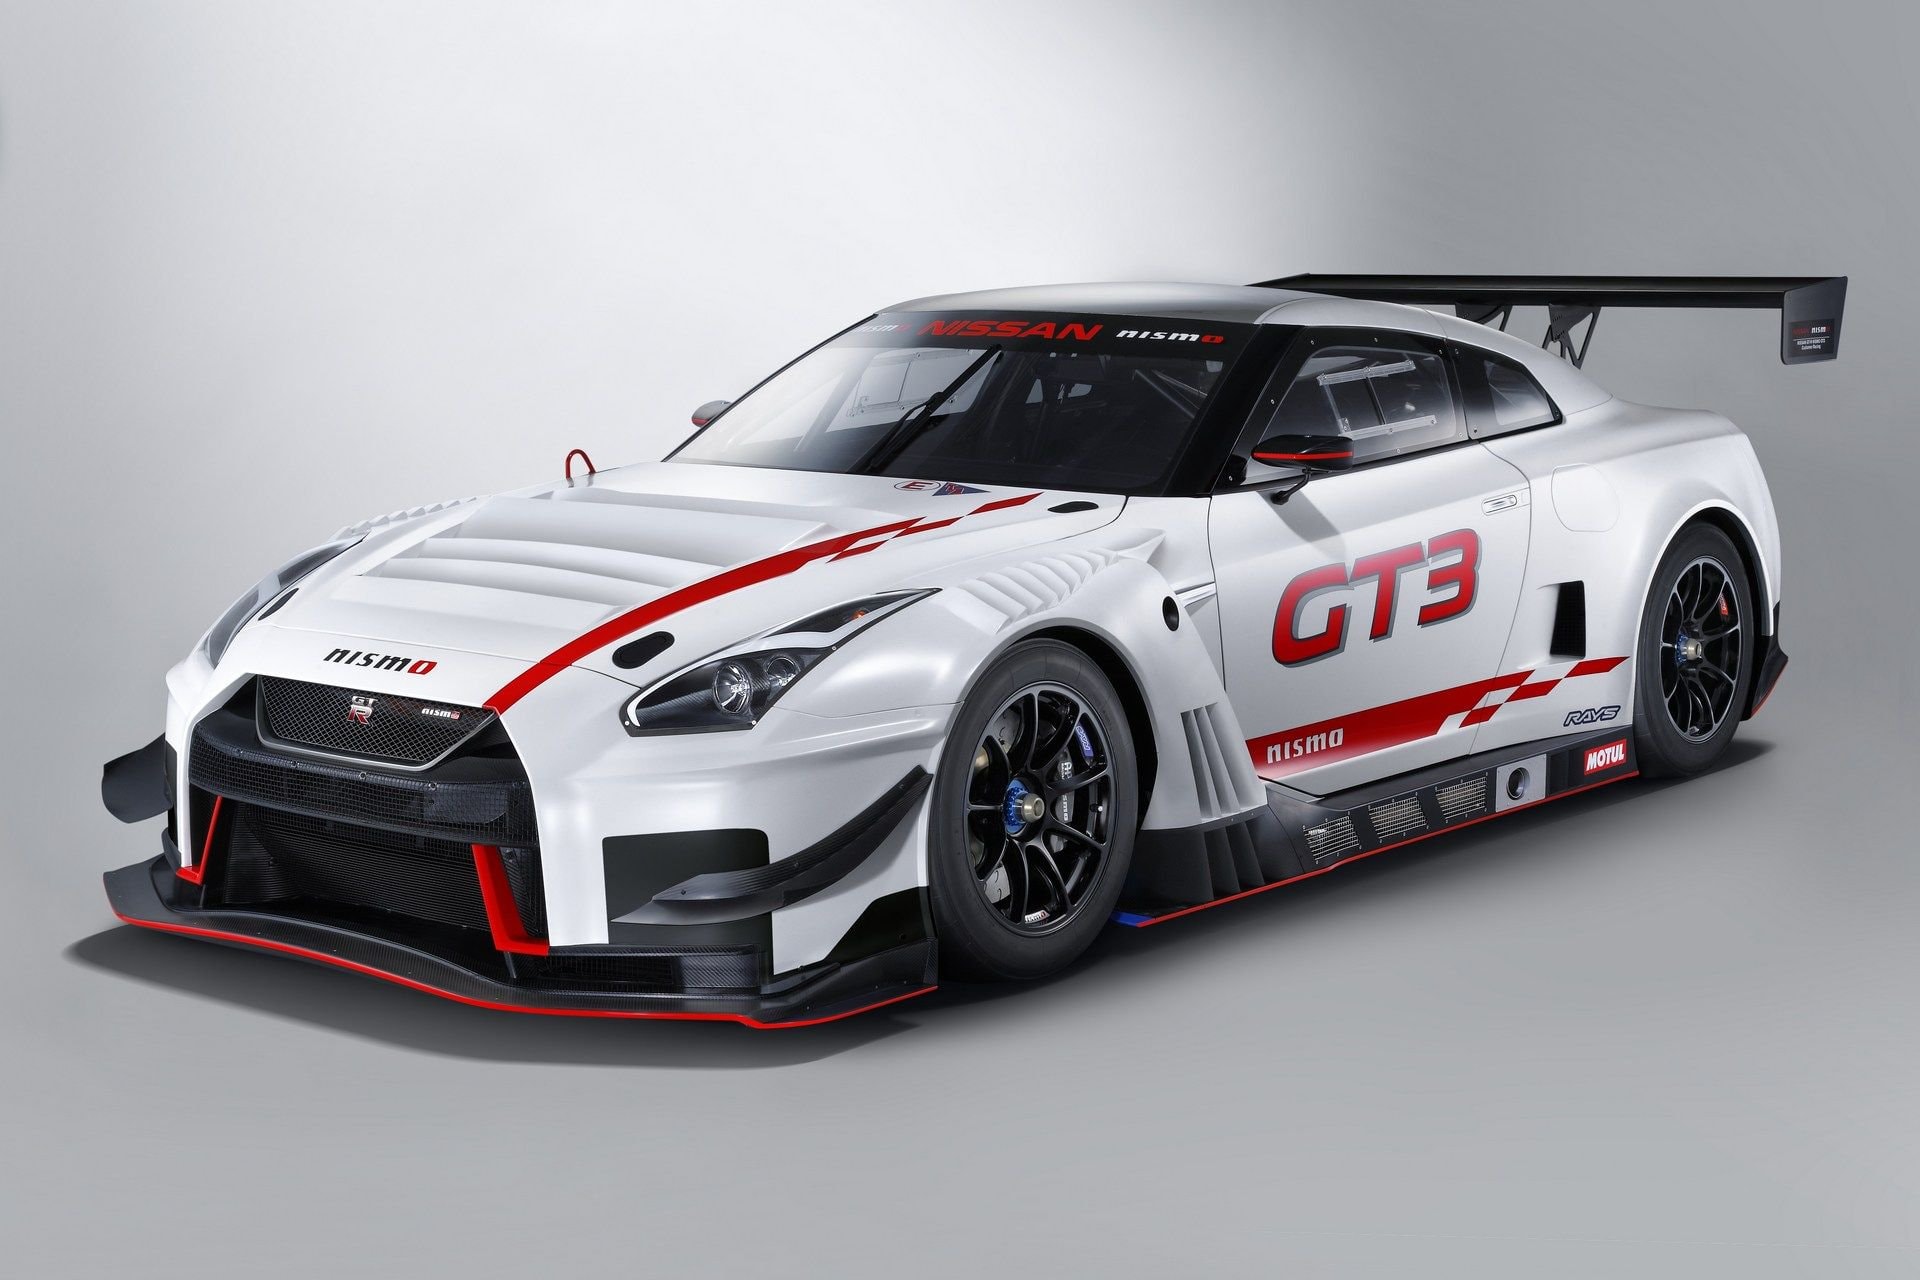 New Nissan NISMO Performance Road Cars